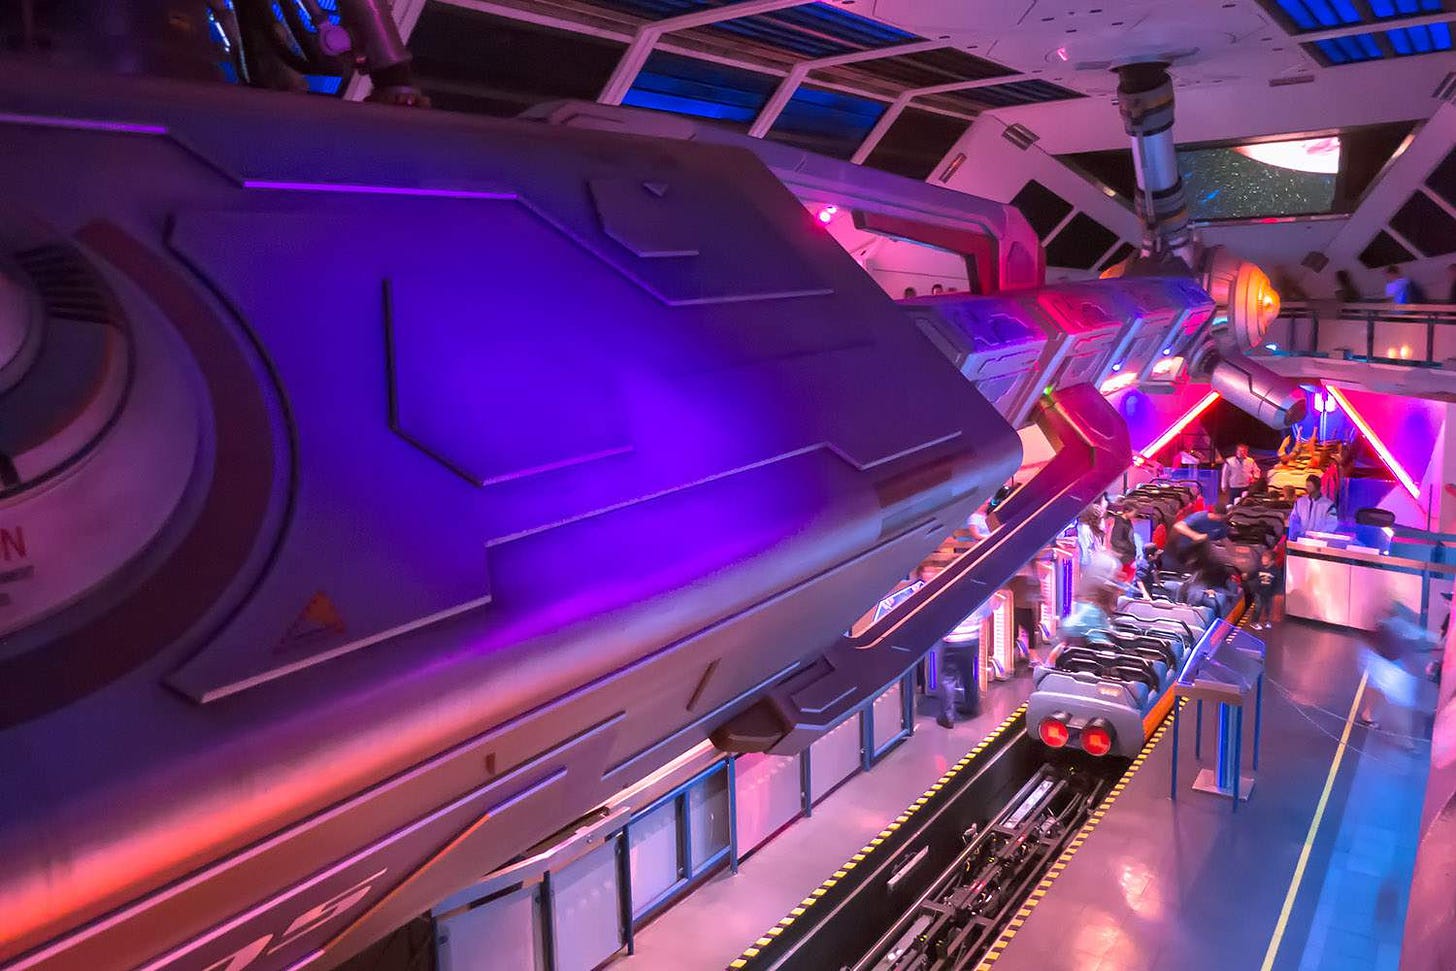 Space Mountain at Disneyland: Things You Need to Know